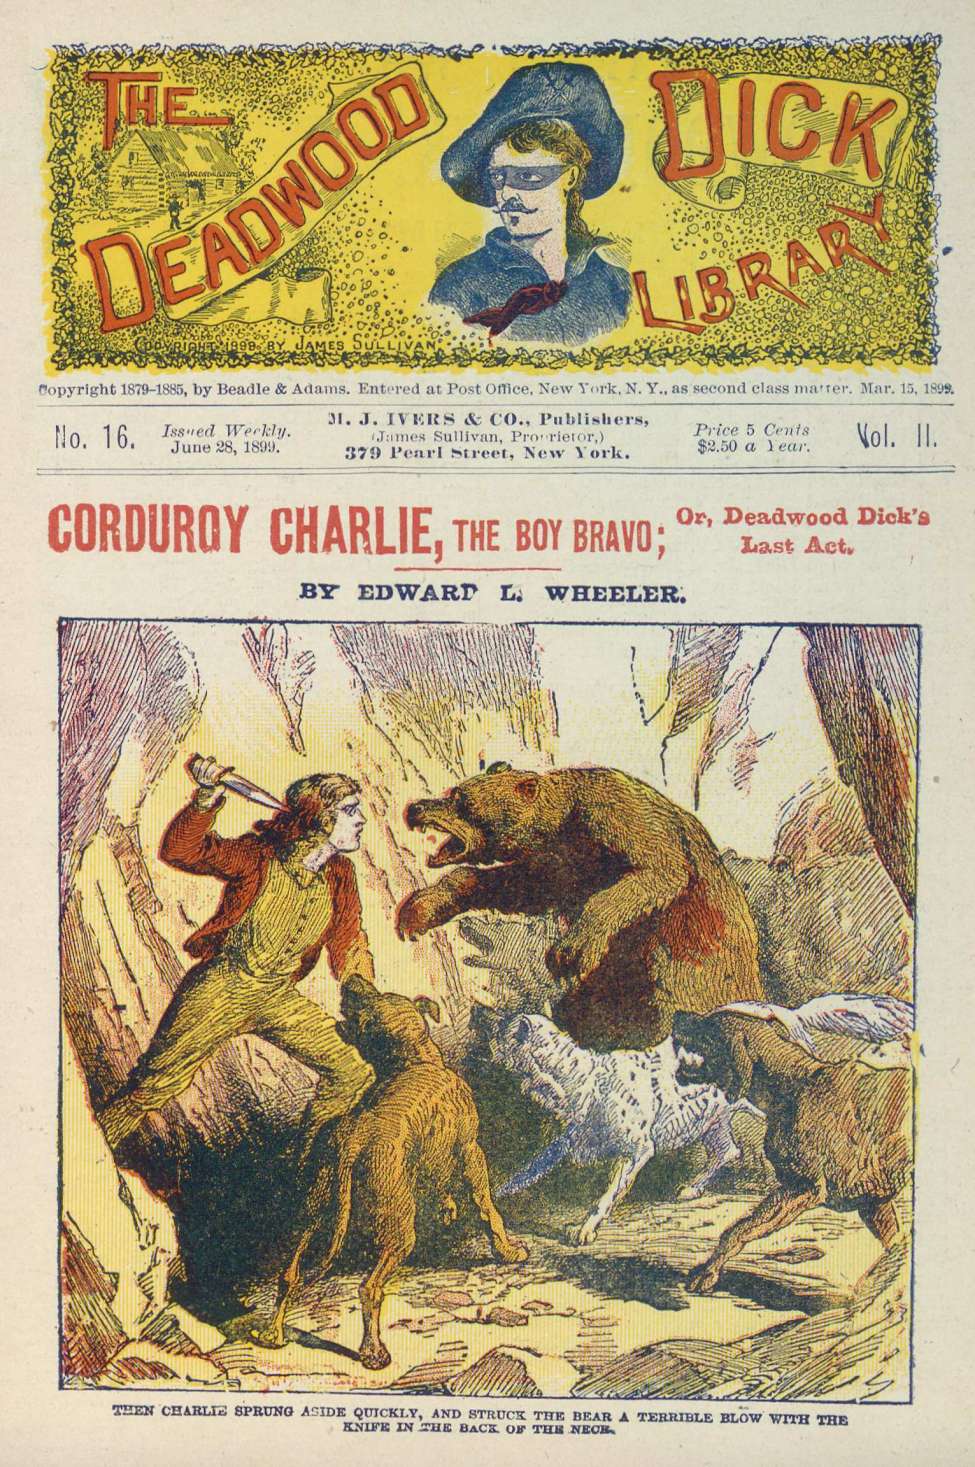 Book Cover For Deadwood Dick Library v2 16 - Corduroy Charlie, the Boy Bravo